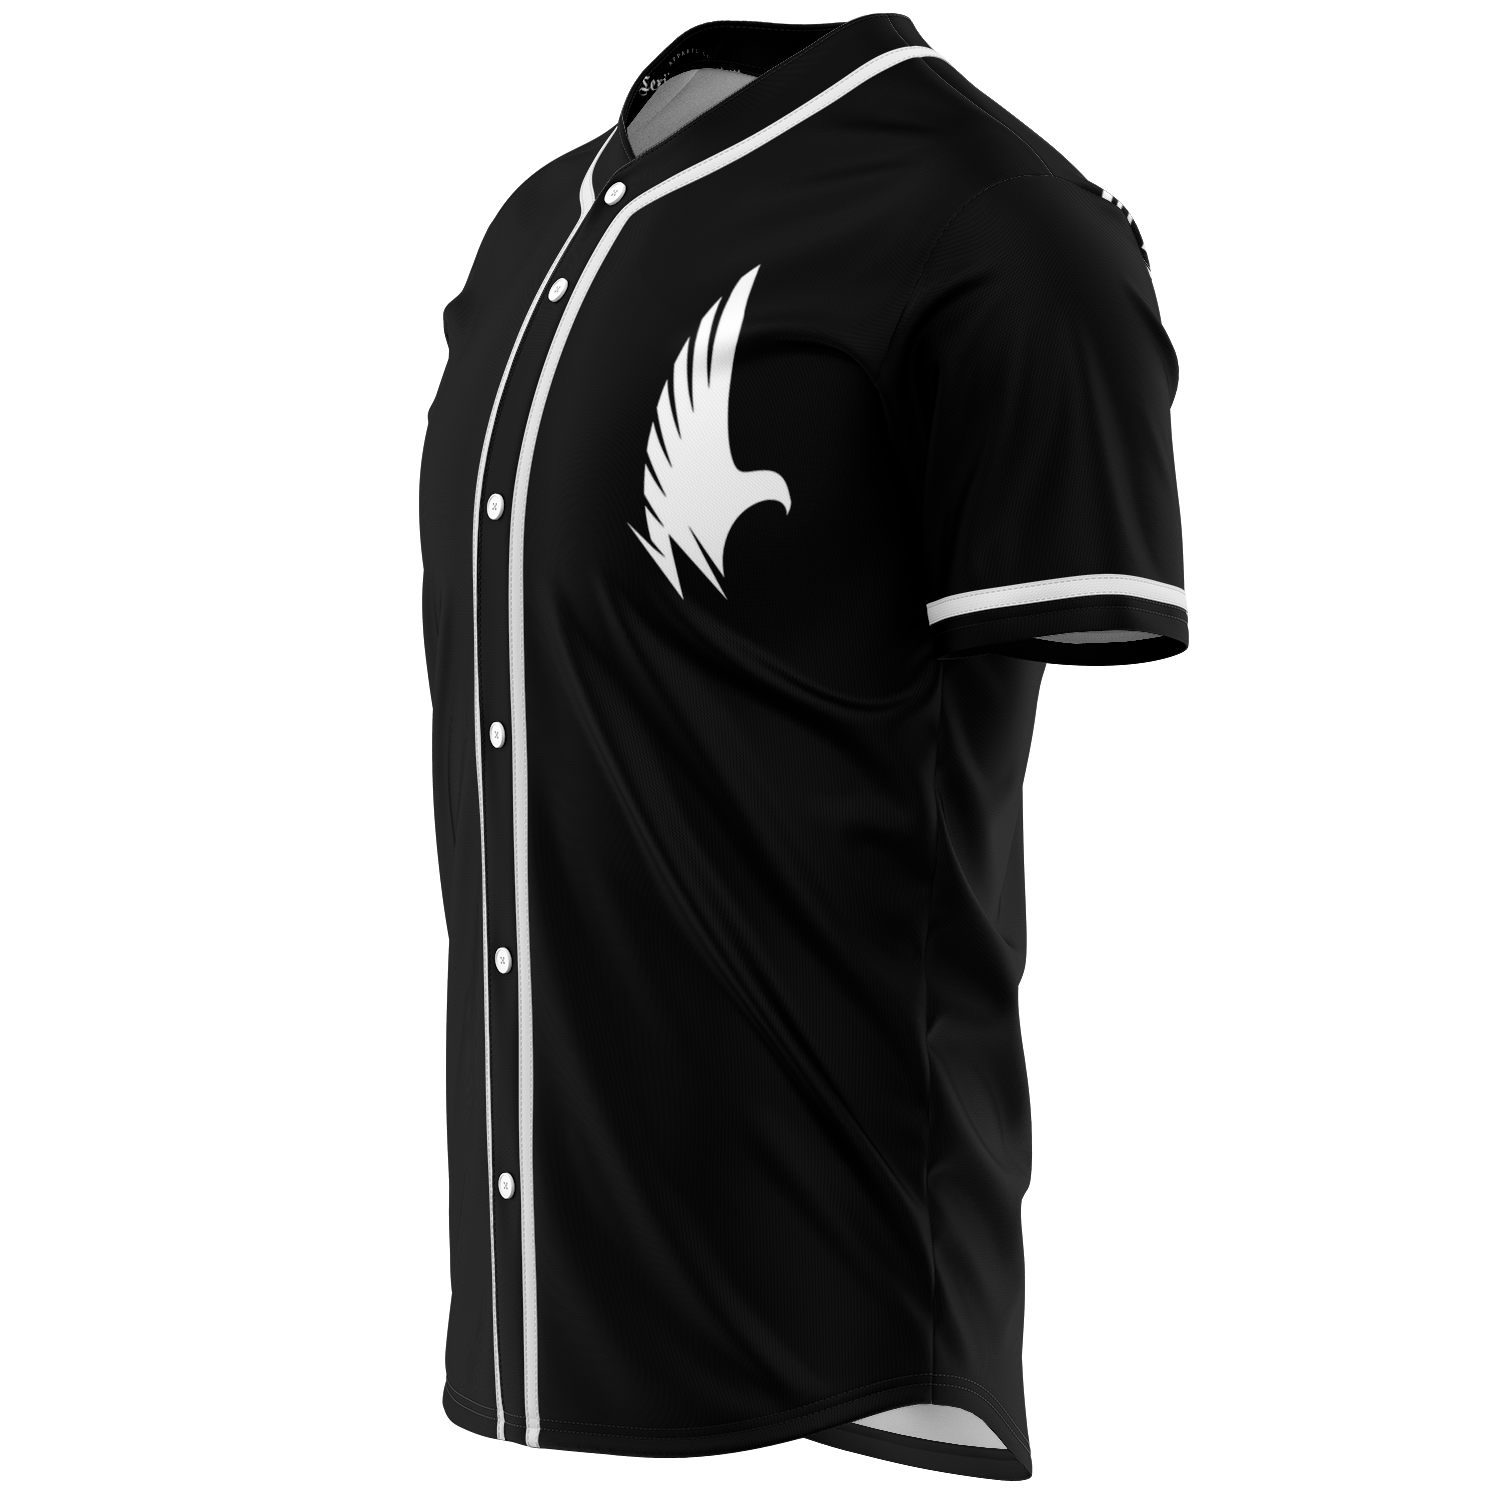 Mexican Legend Chicano Pride Baseball Jersey - - Loyalty Vibes